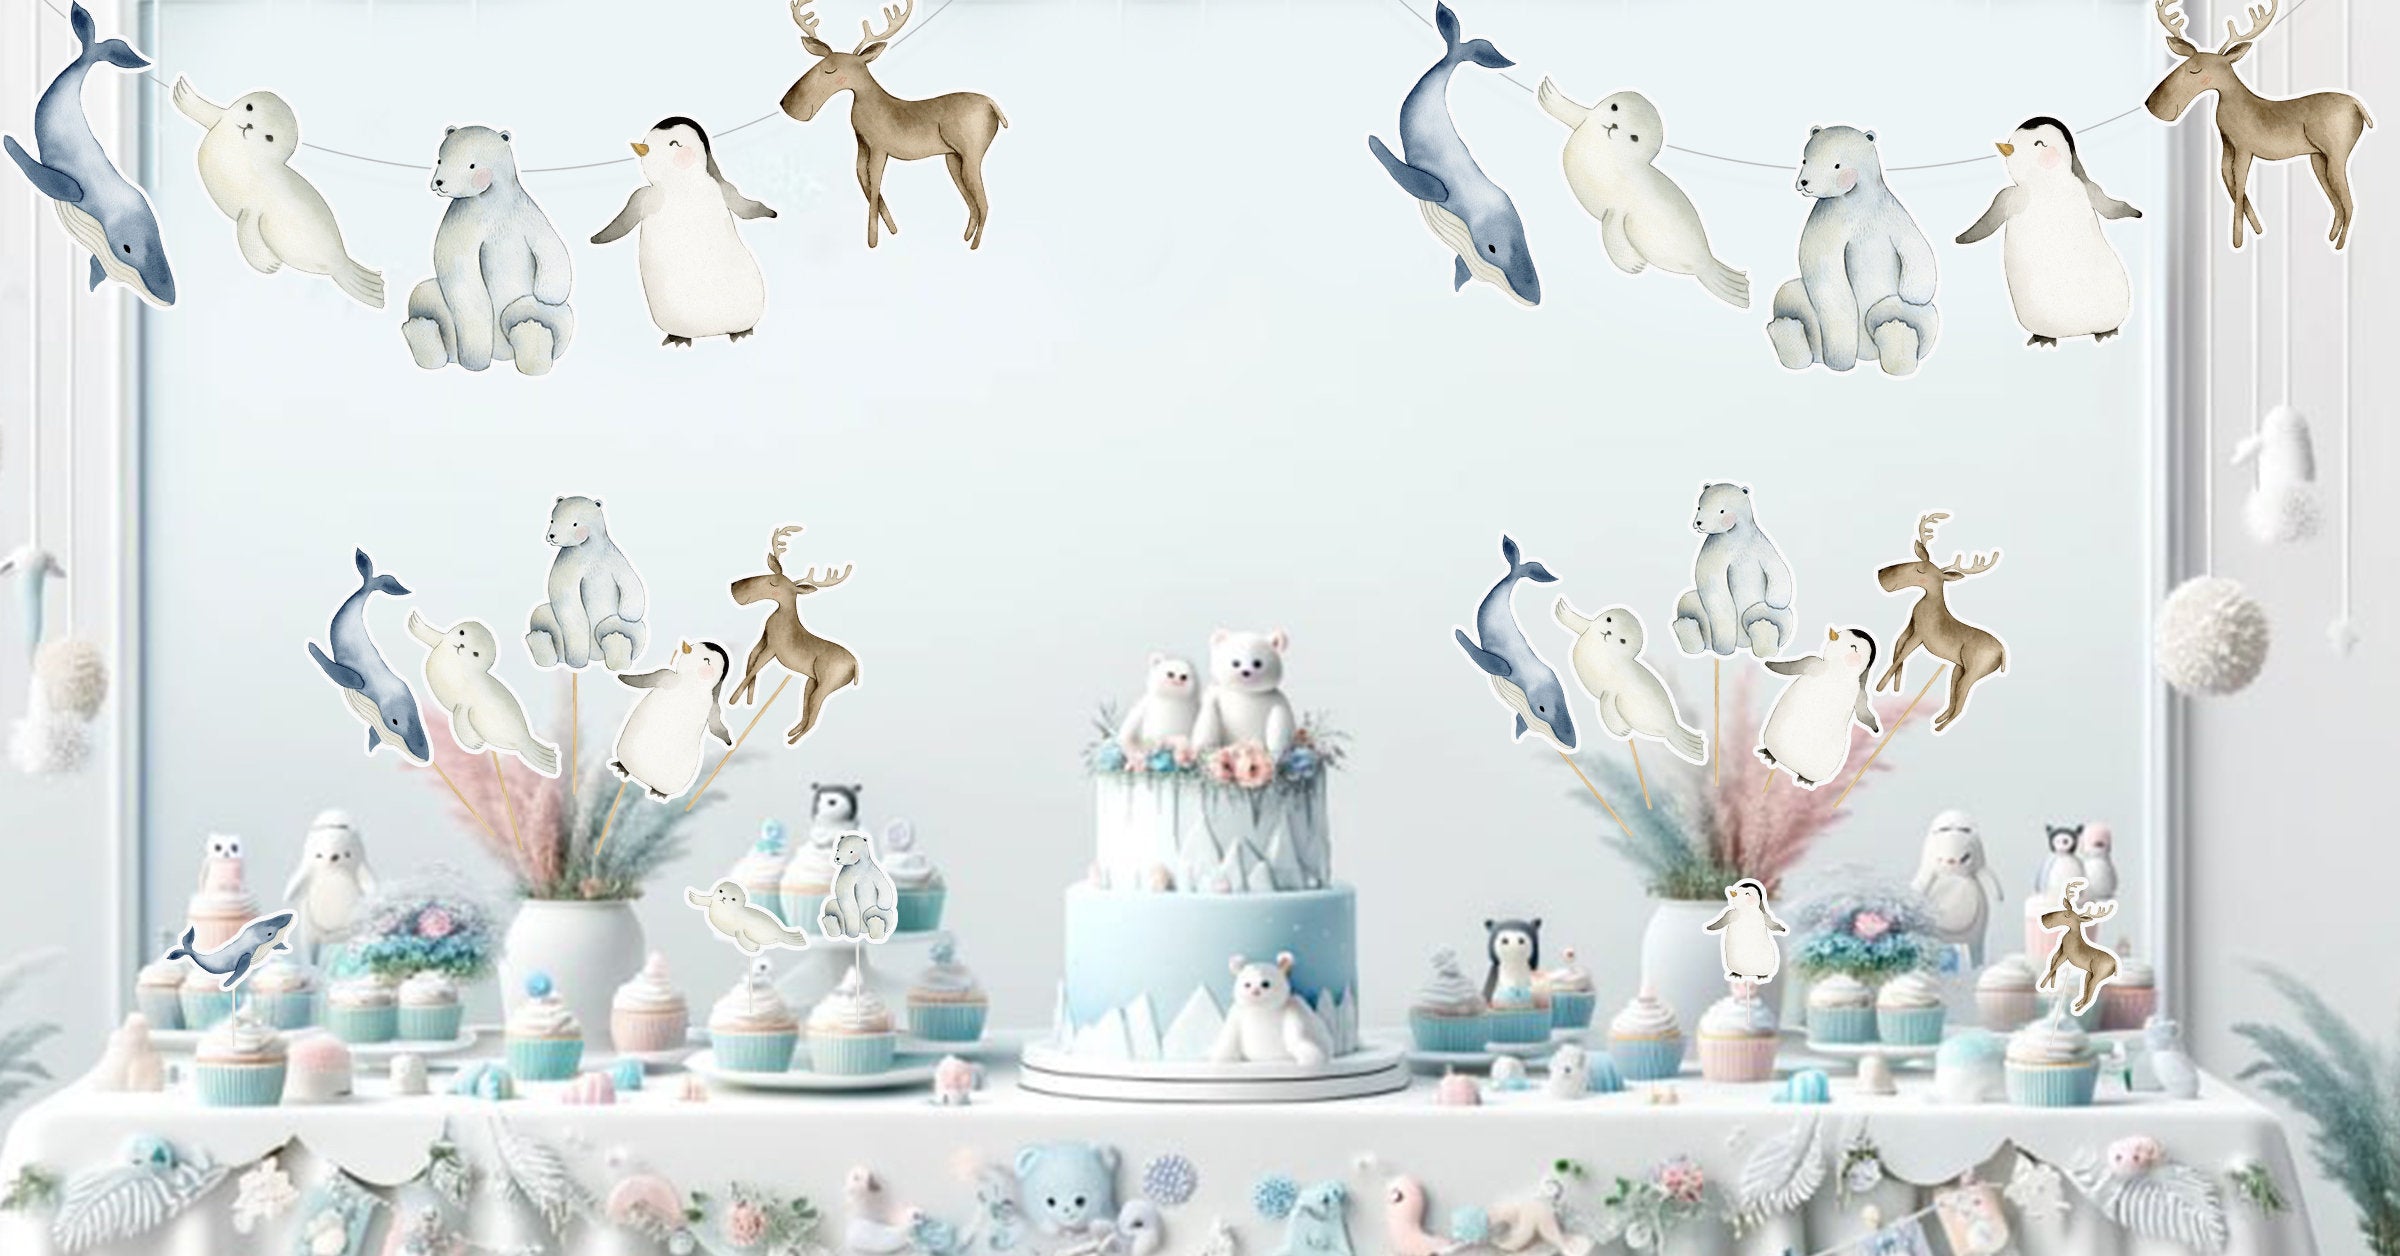 Arctic Blast Party Decor Set - Banner, Cake Topper, Cupcake Toppers & Centerpieces for Cool Birthdays & Baby Showers